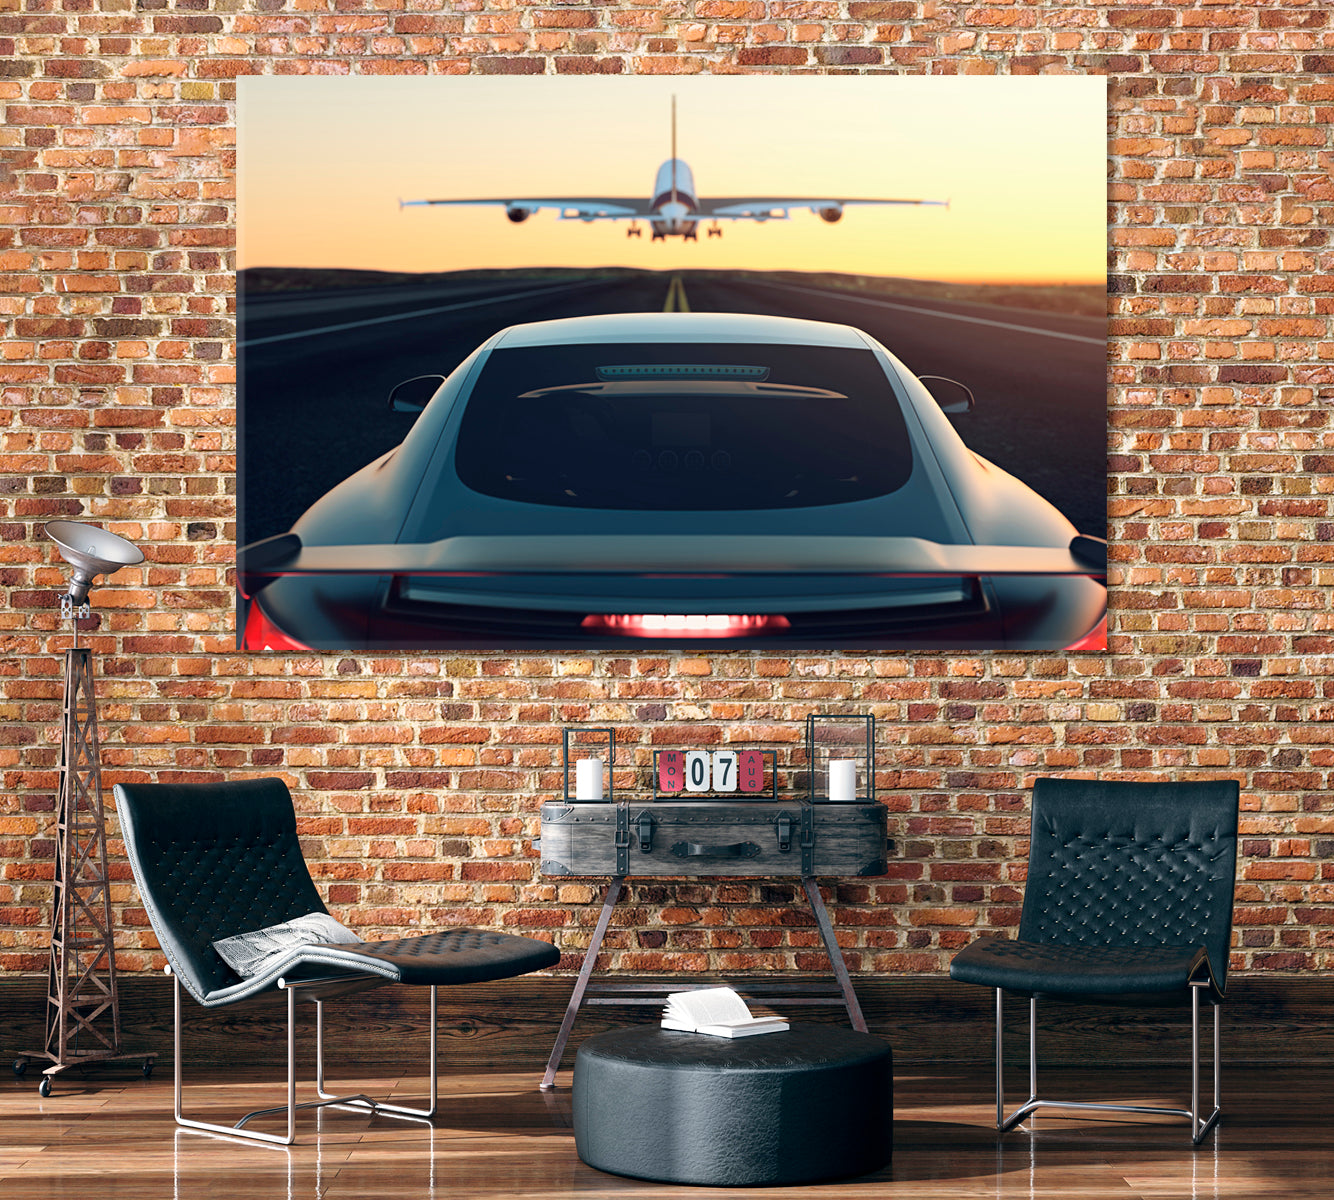 Sports Car and Airplane on Same Road Canvas Print ArtLexy 1 Panel 24"x16" inches 